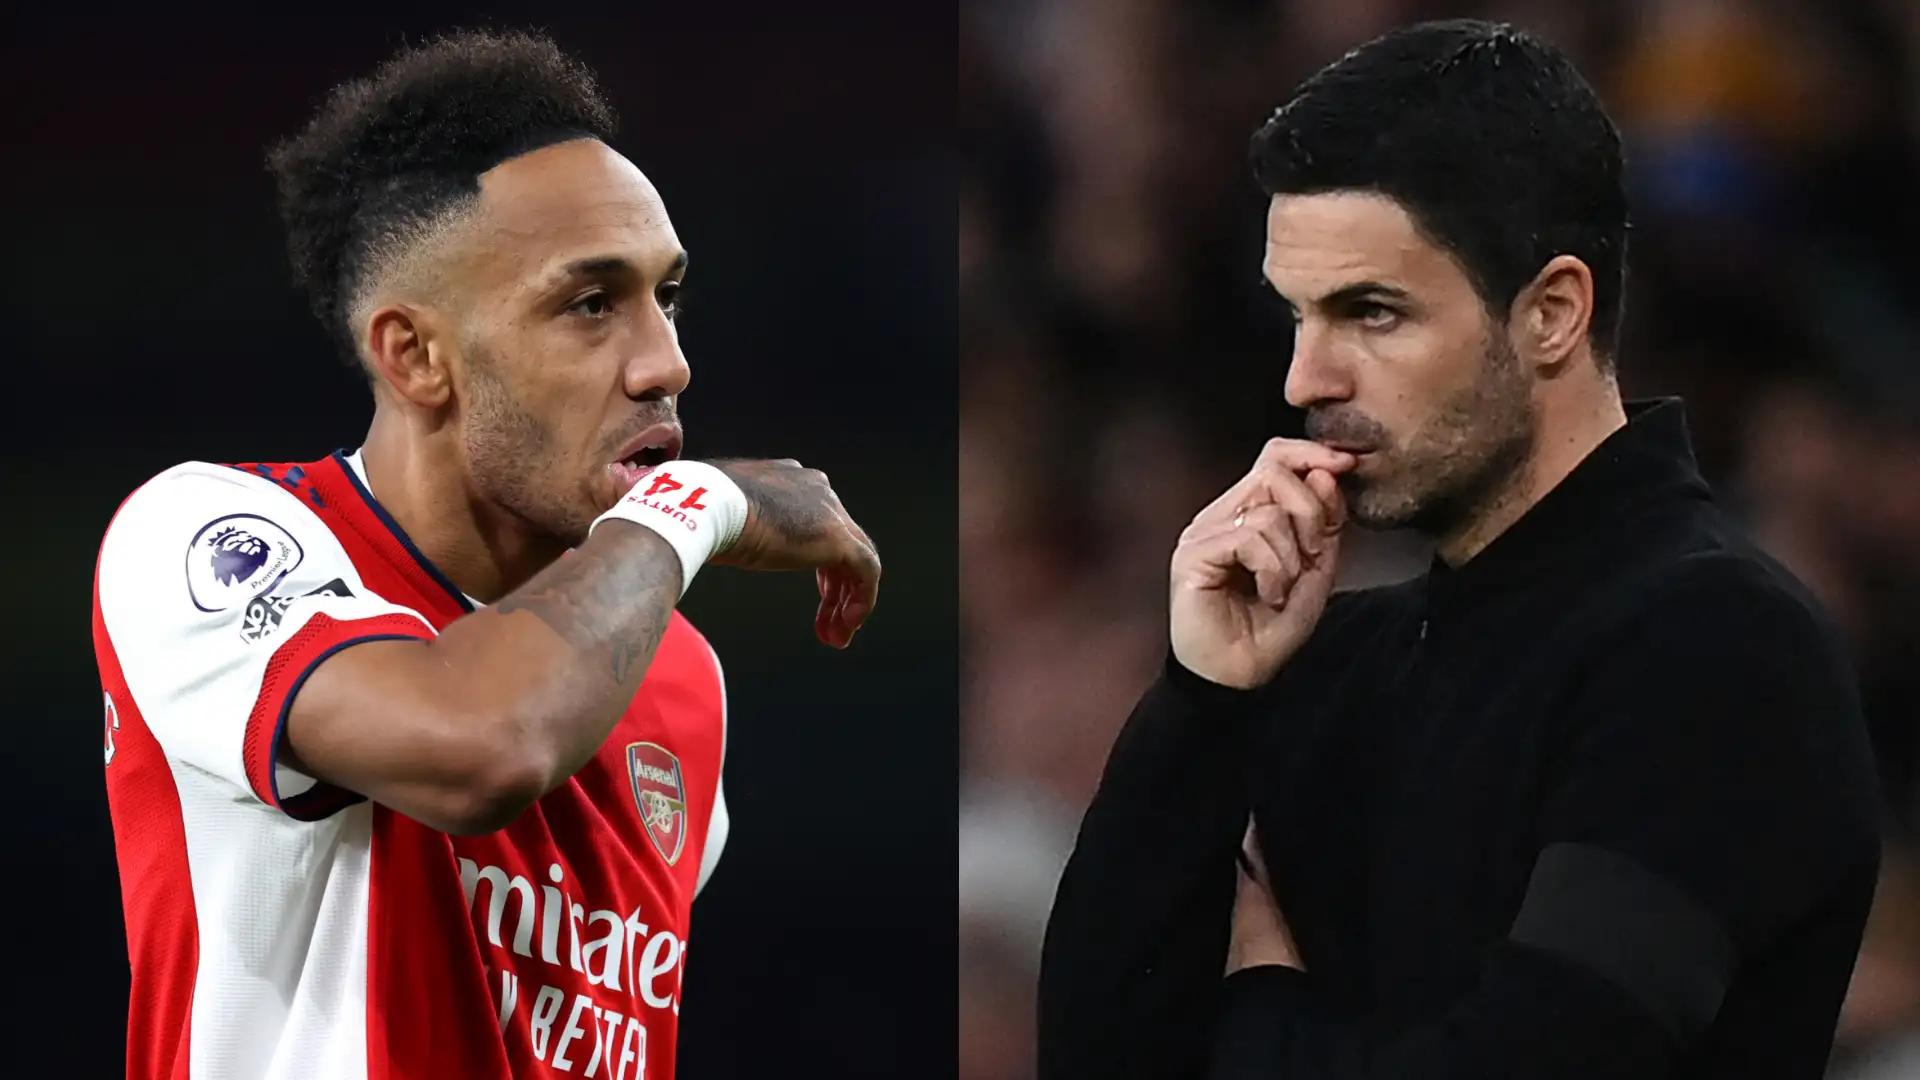 'You put a knife in my back!' - Pierre-Emerick Aubameyang reveals 'crazy' clash with Mikel Arteta that saw striker forced out of Arsenal